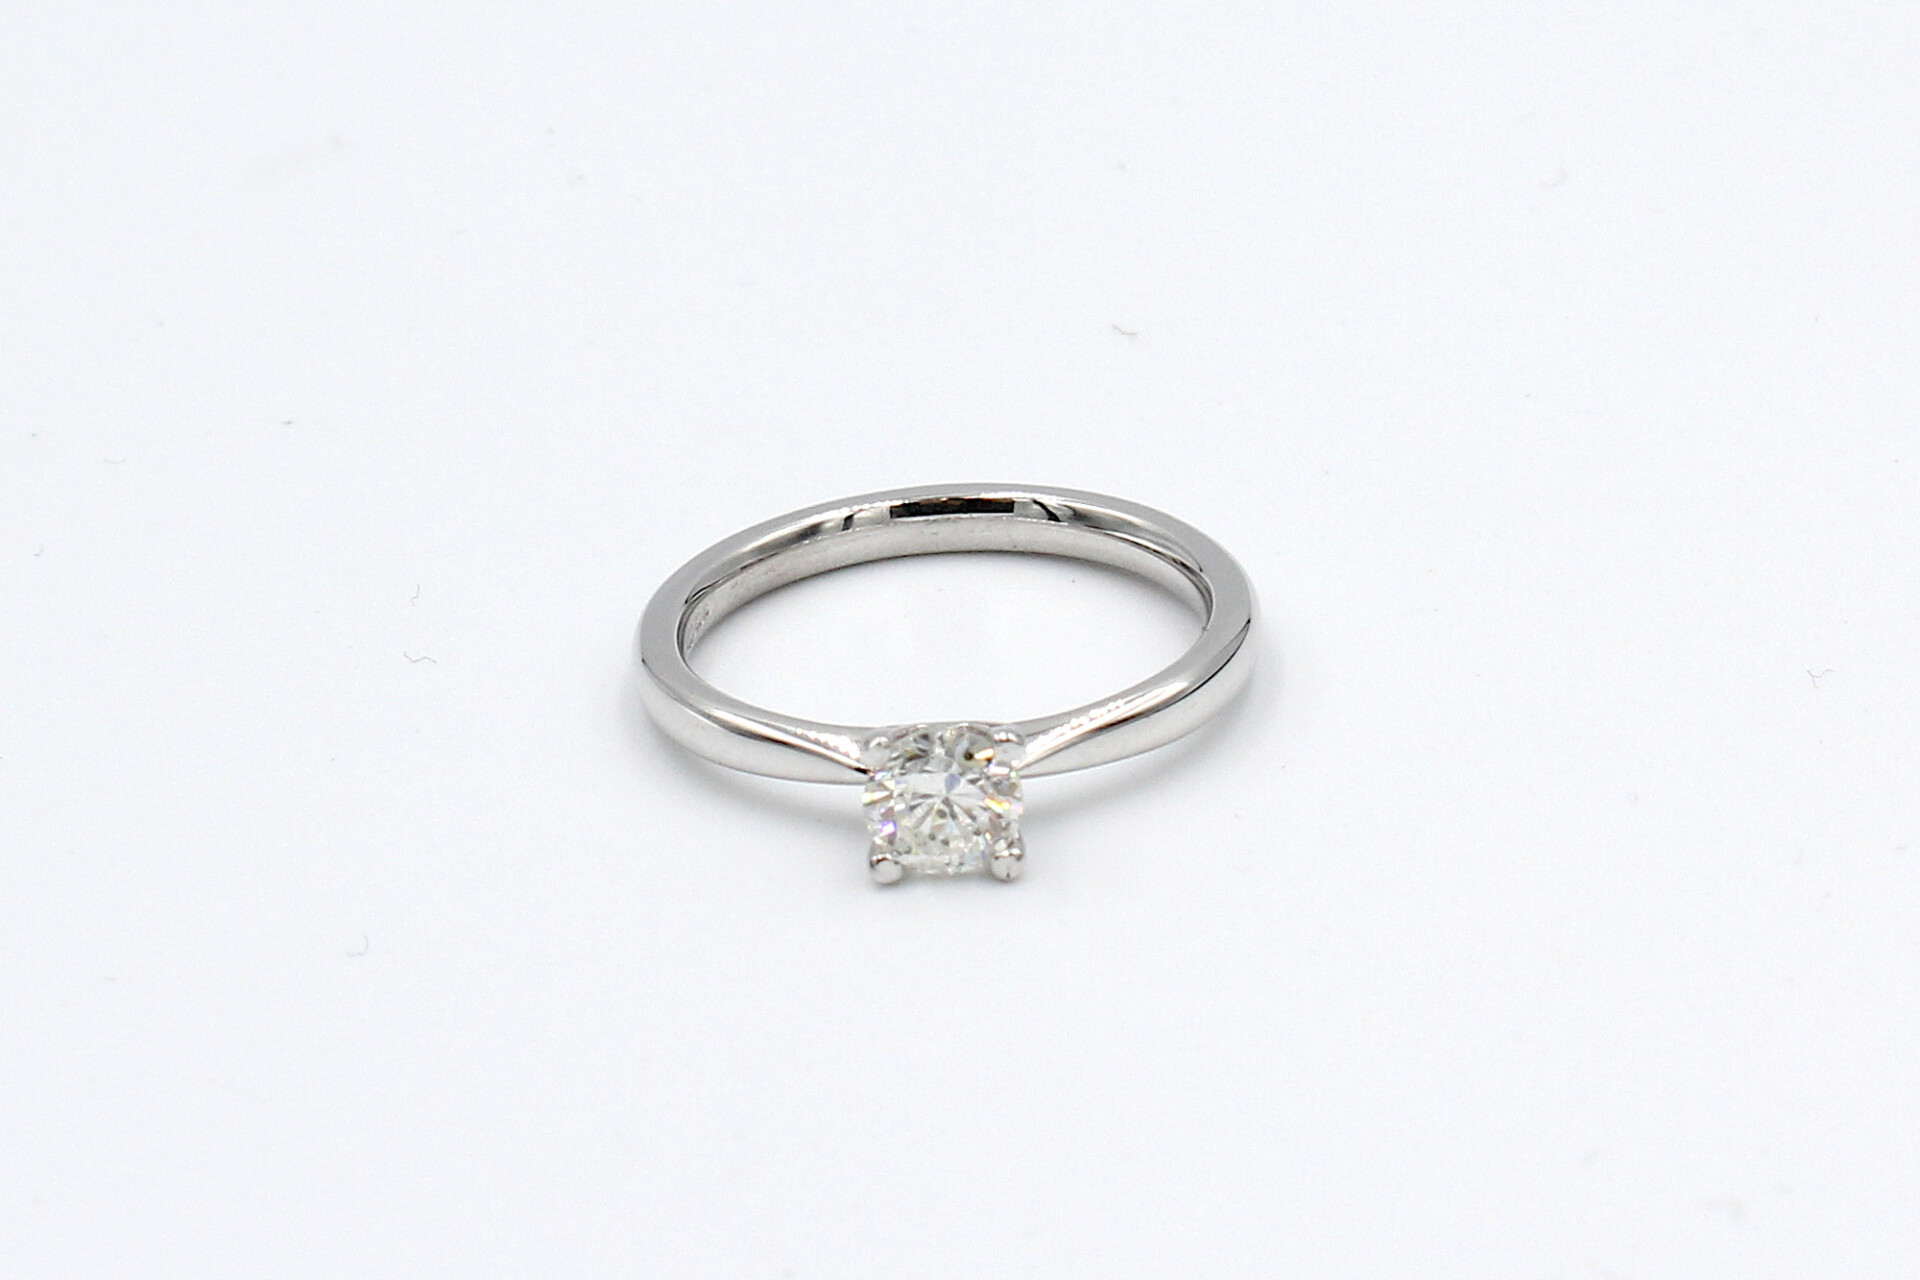 top view of a white gold diamond engagement ring